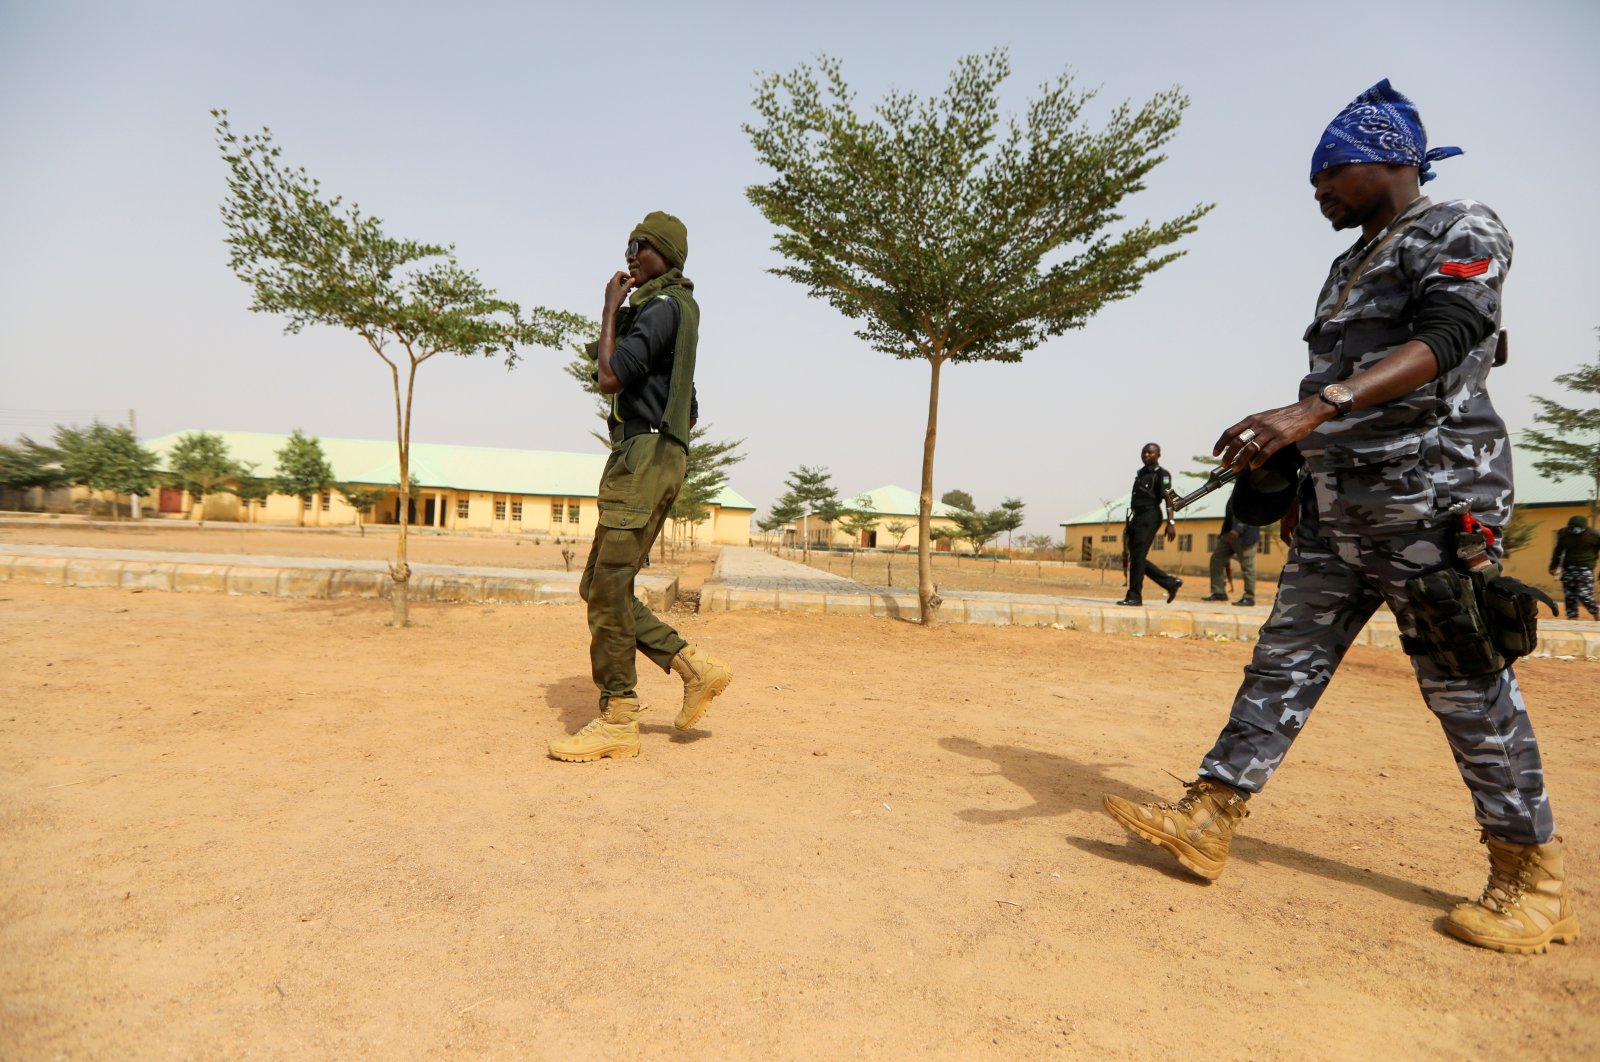 Police officers walk at the JSS Jangebe school, a day after over 300 school girls were abducted by bandits, in Zamfara, Nigeria Feb. 27, 2021. (Reuters Photo)